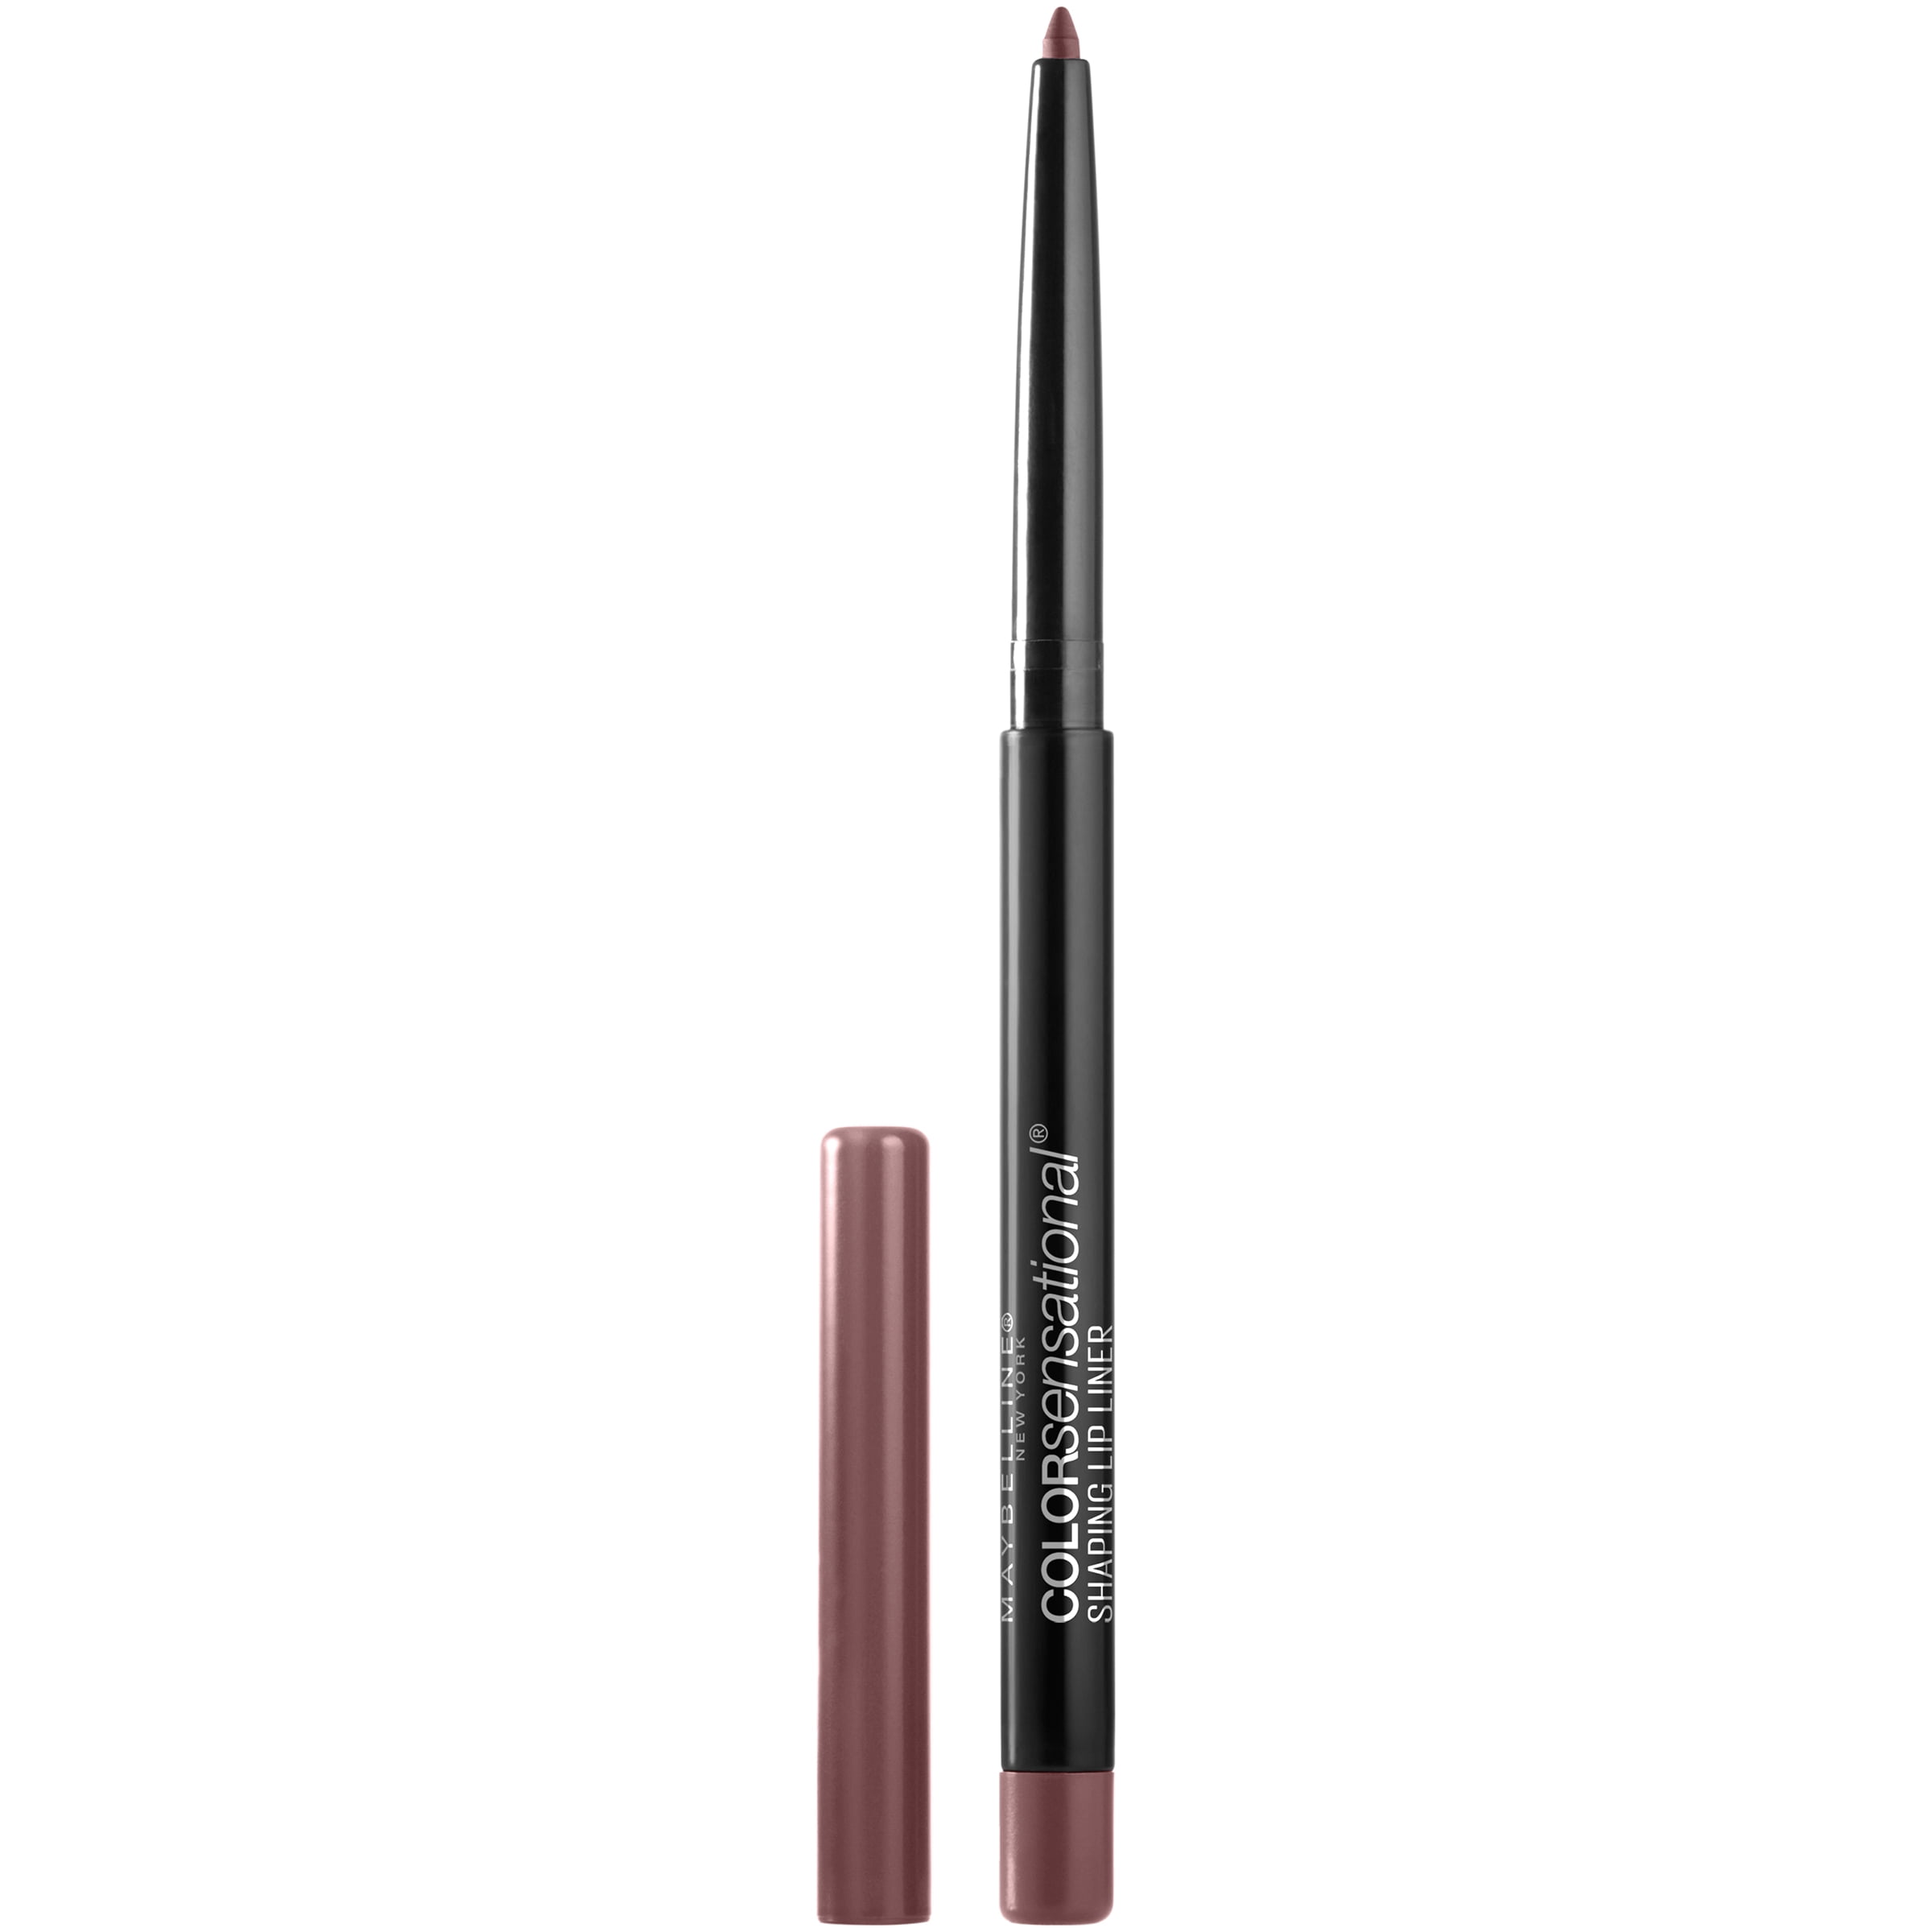 Lip Maybelline 0.01 Raw Color Shaping Sensational Liner Makeup, Chocolate, oz.